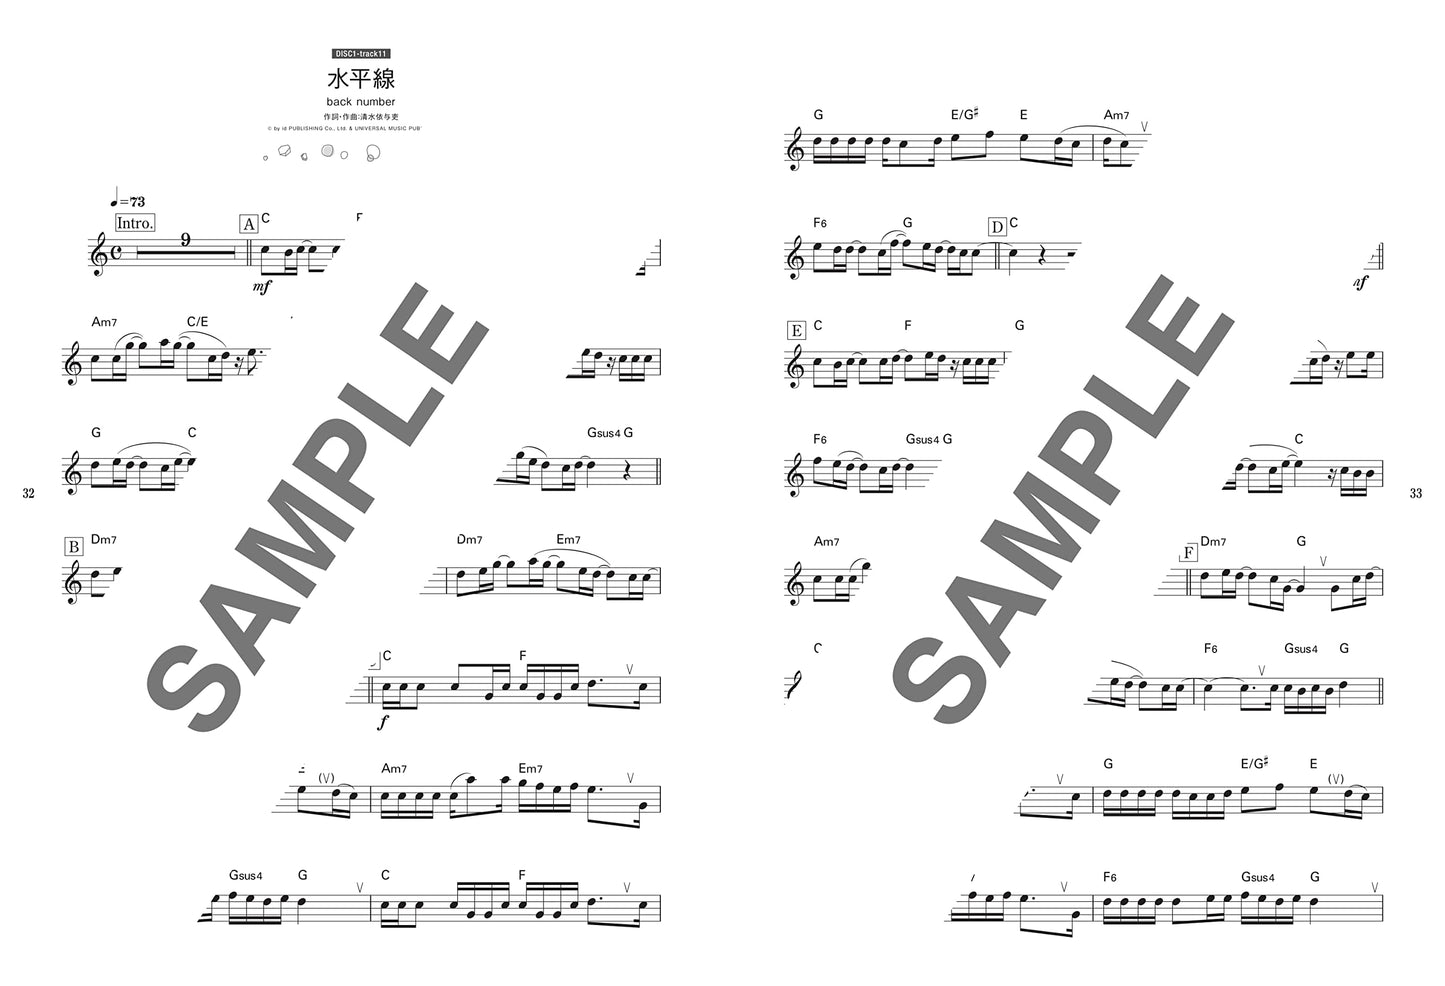 New and Standard J-POP for Trumpet Solo(Upper-Intermediate) w/CD(Backing Tracks) Sheet Music Book